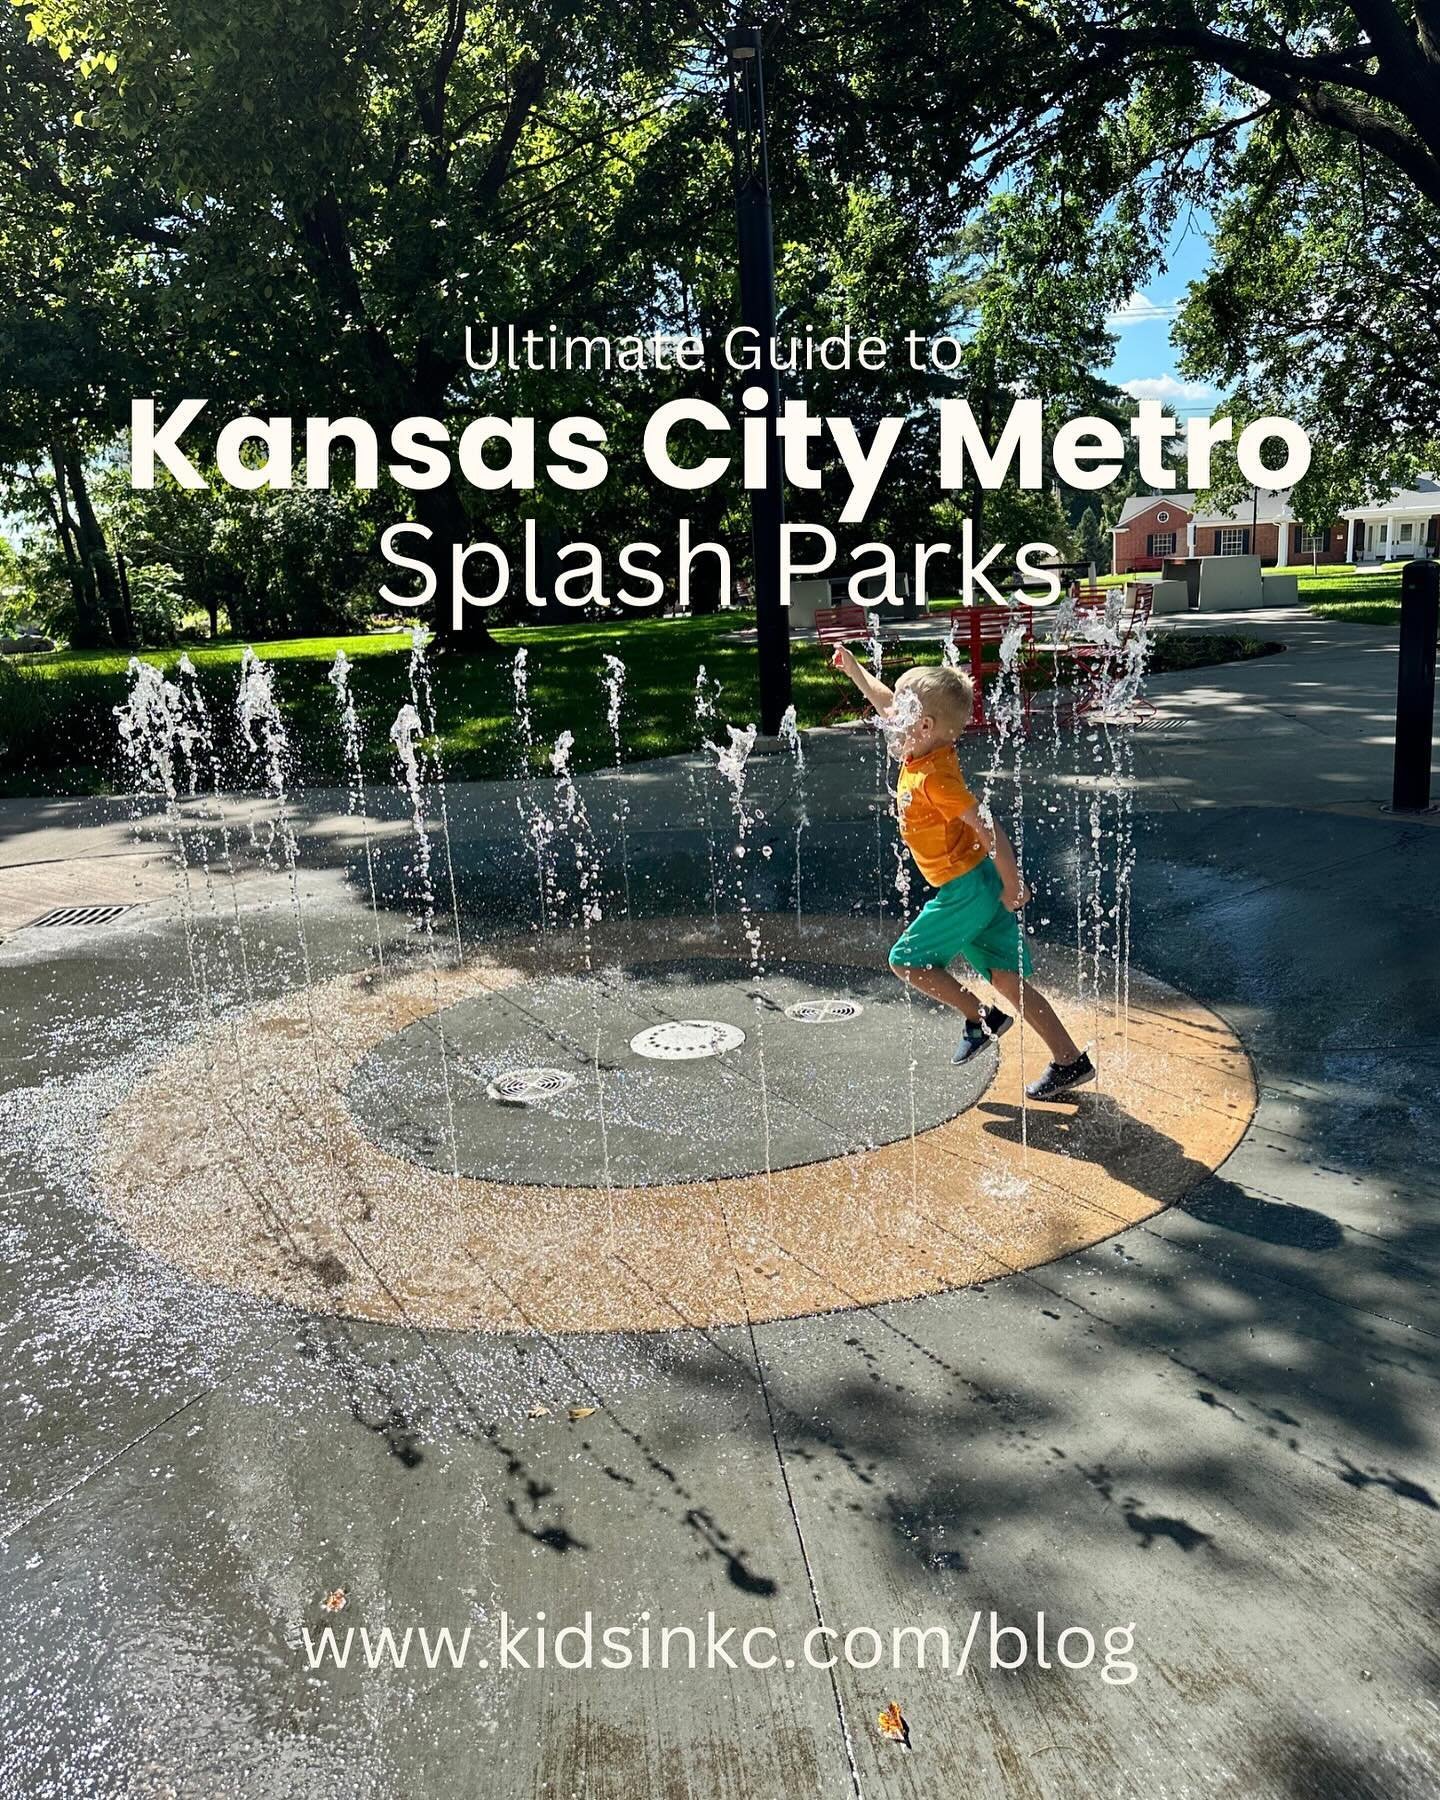 Discover all of the splash parks in and around Kansas City! 💦

Splash parks are the answer if you&rsquo;re looking for a fantastic way to keep the kids entertained and cool during the summer months. Best of all, they offer free admission, evening ho